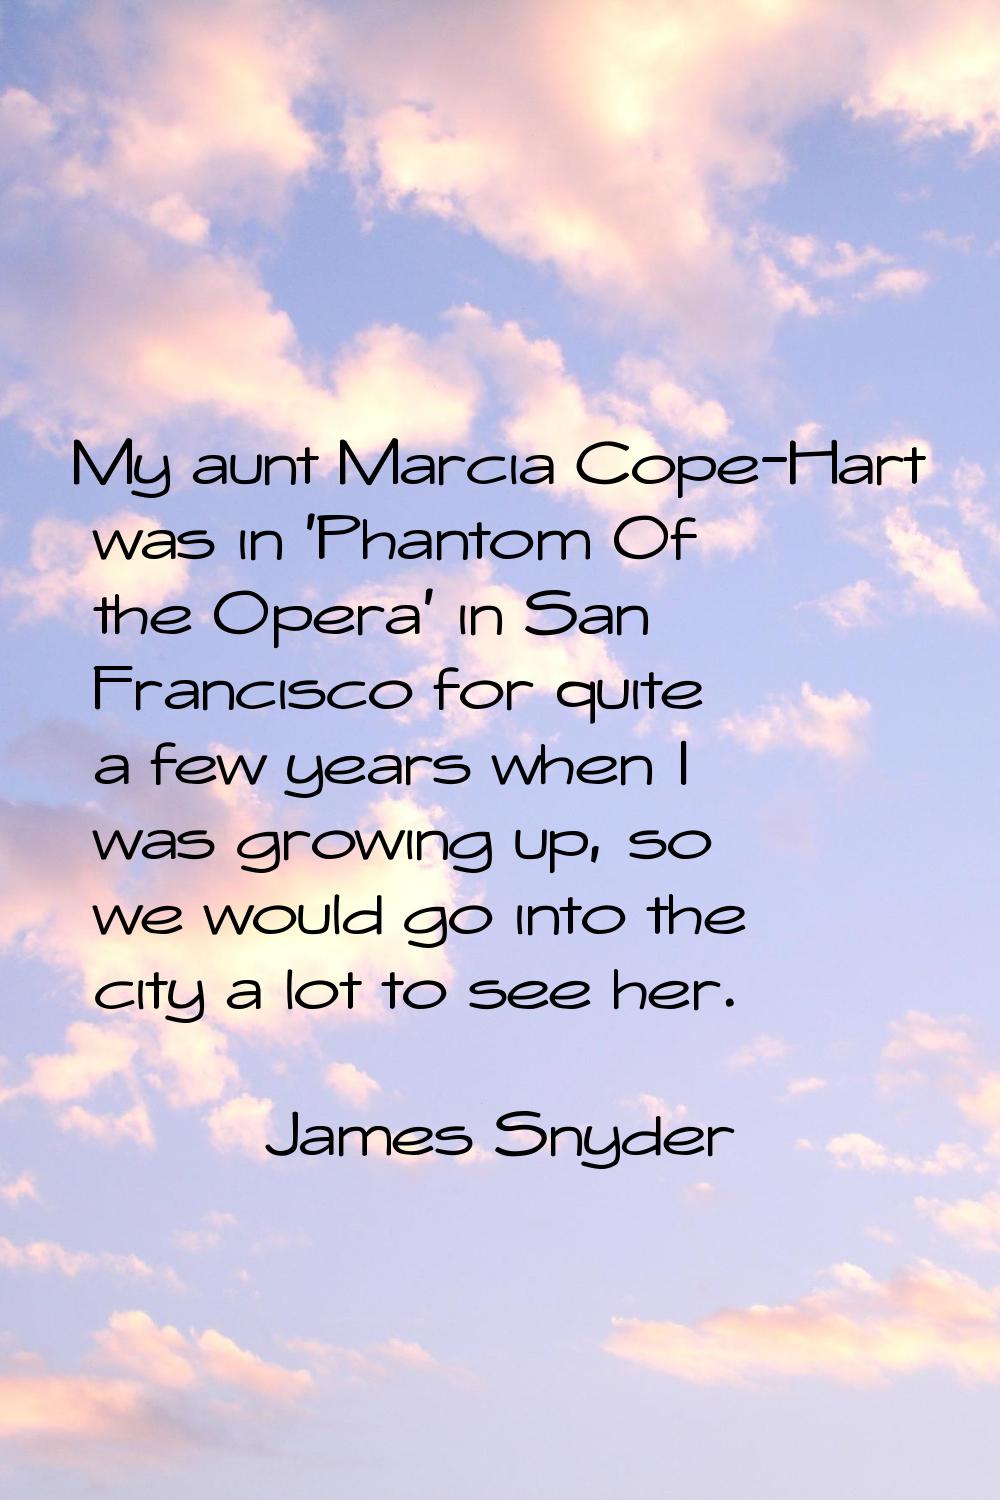 My aunt Marcia Cope-Hart was in 'Phantom Of the Opera' in San Francisco for quite a few years when 